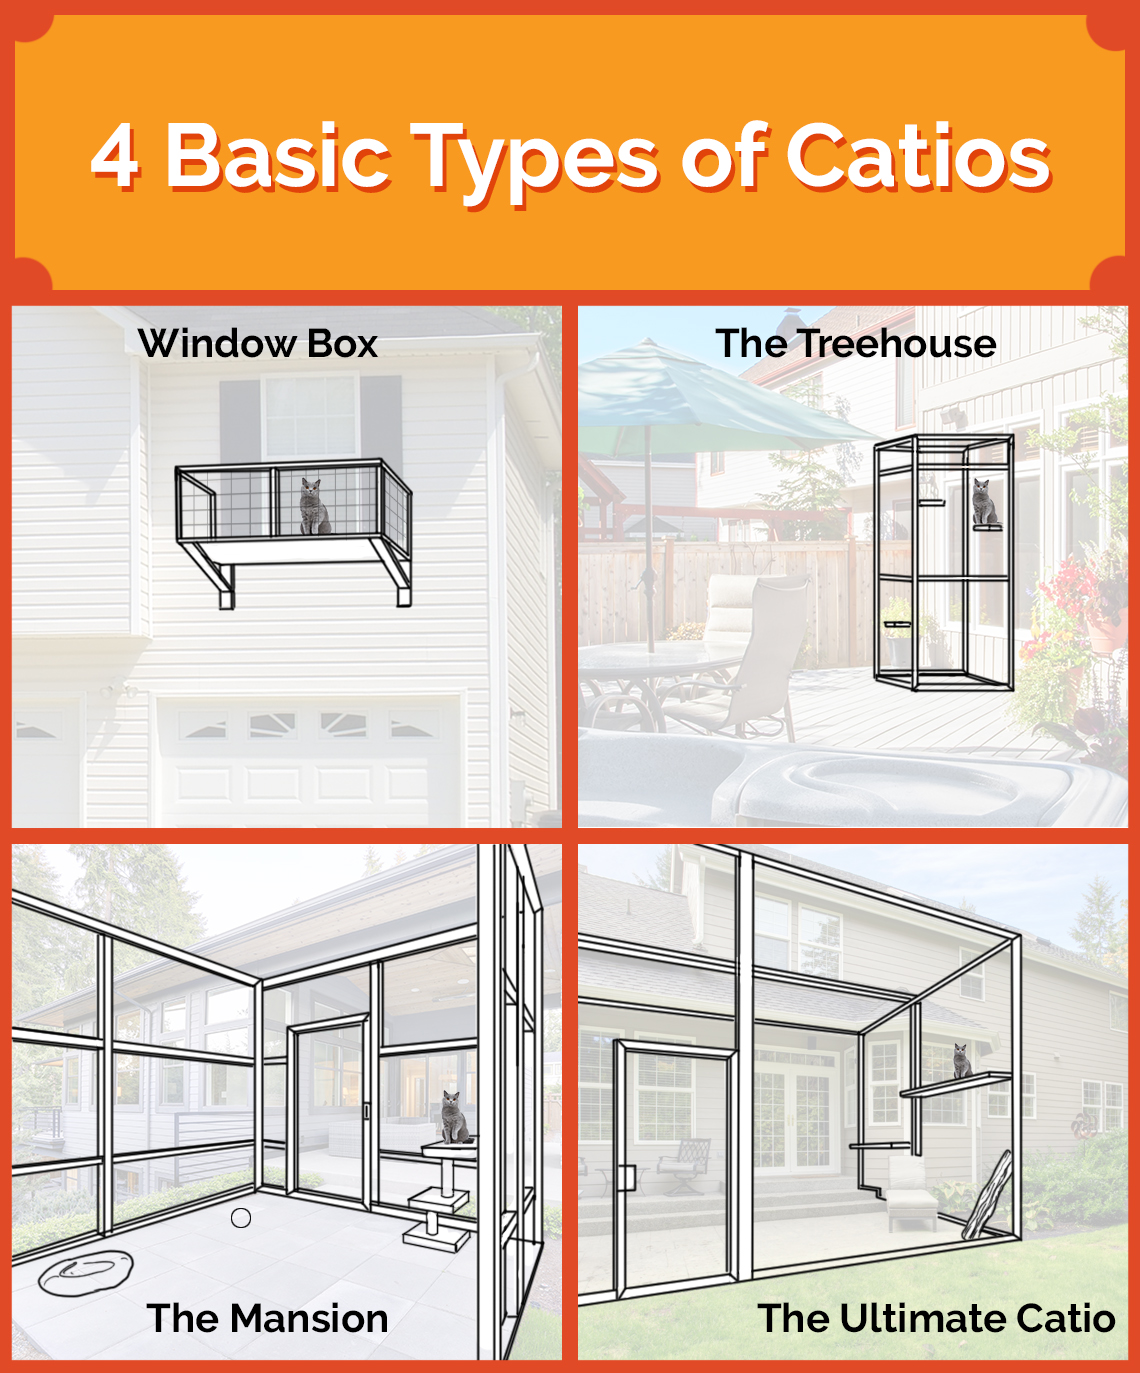 Infographic about the types of catios